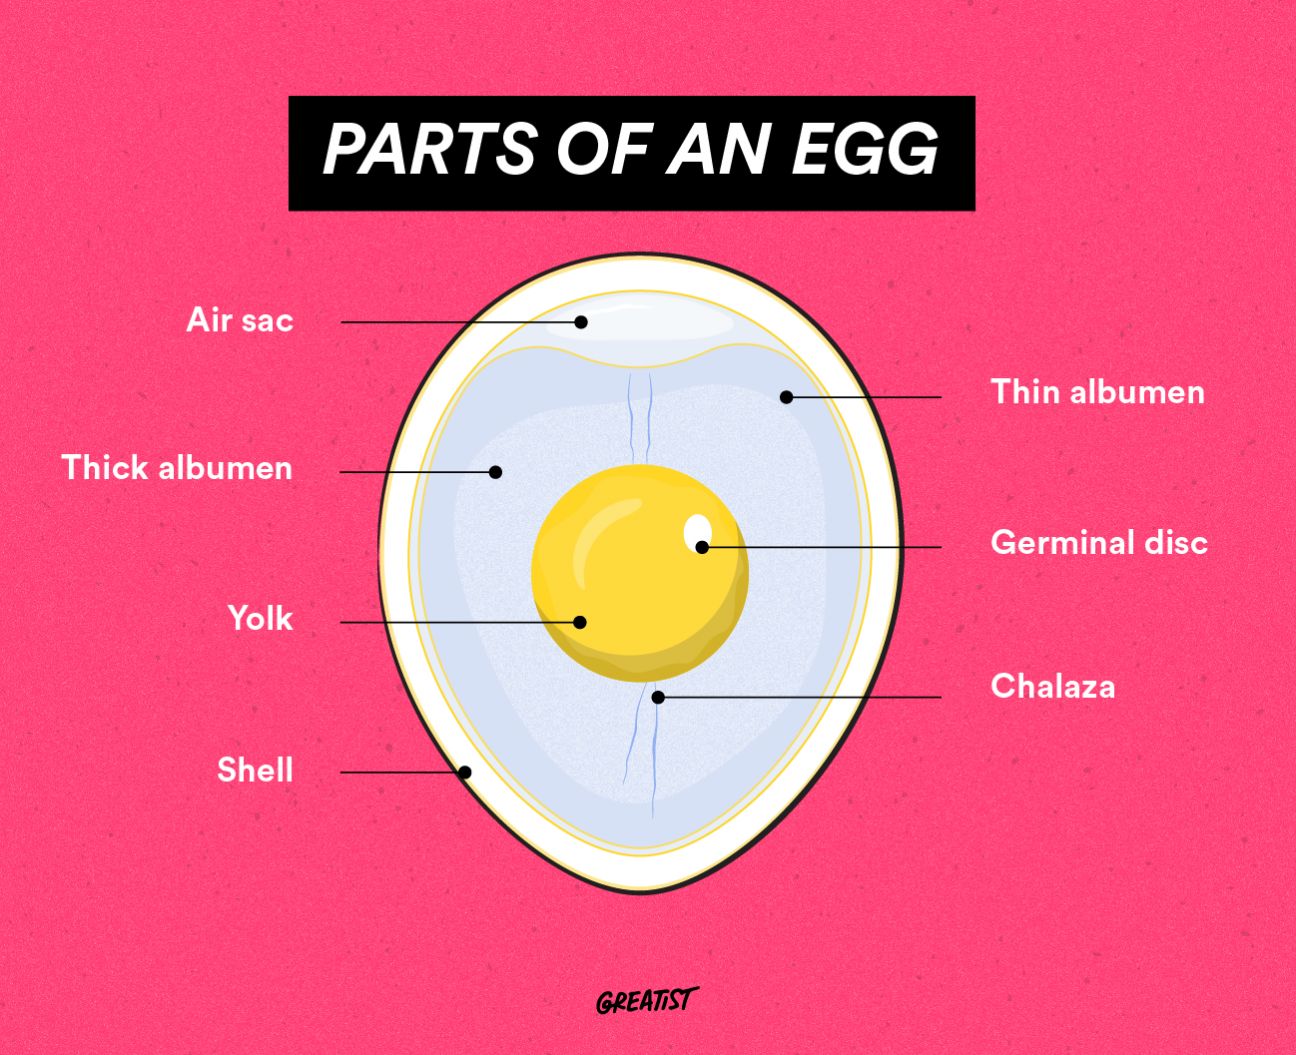 parts of an egg infographic